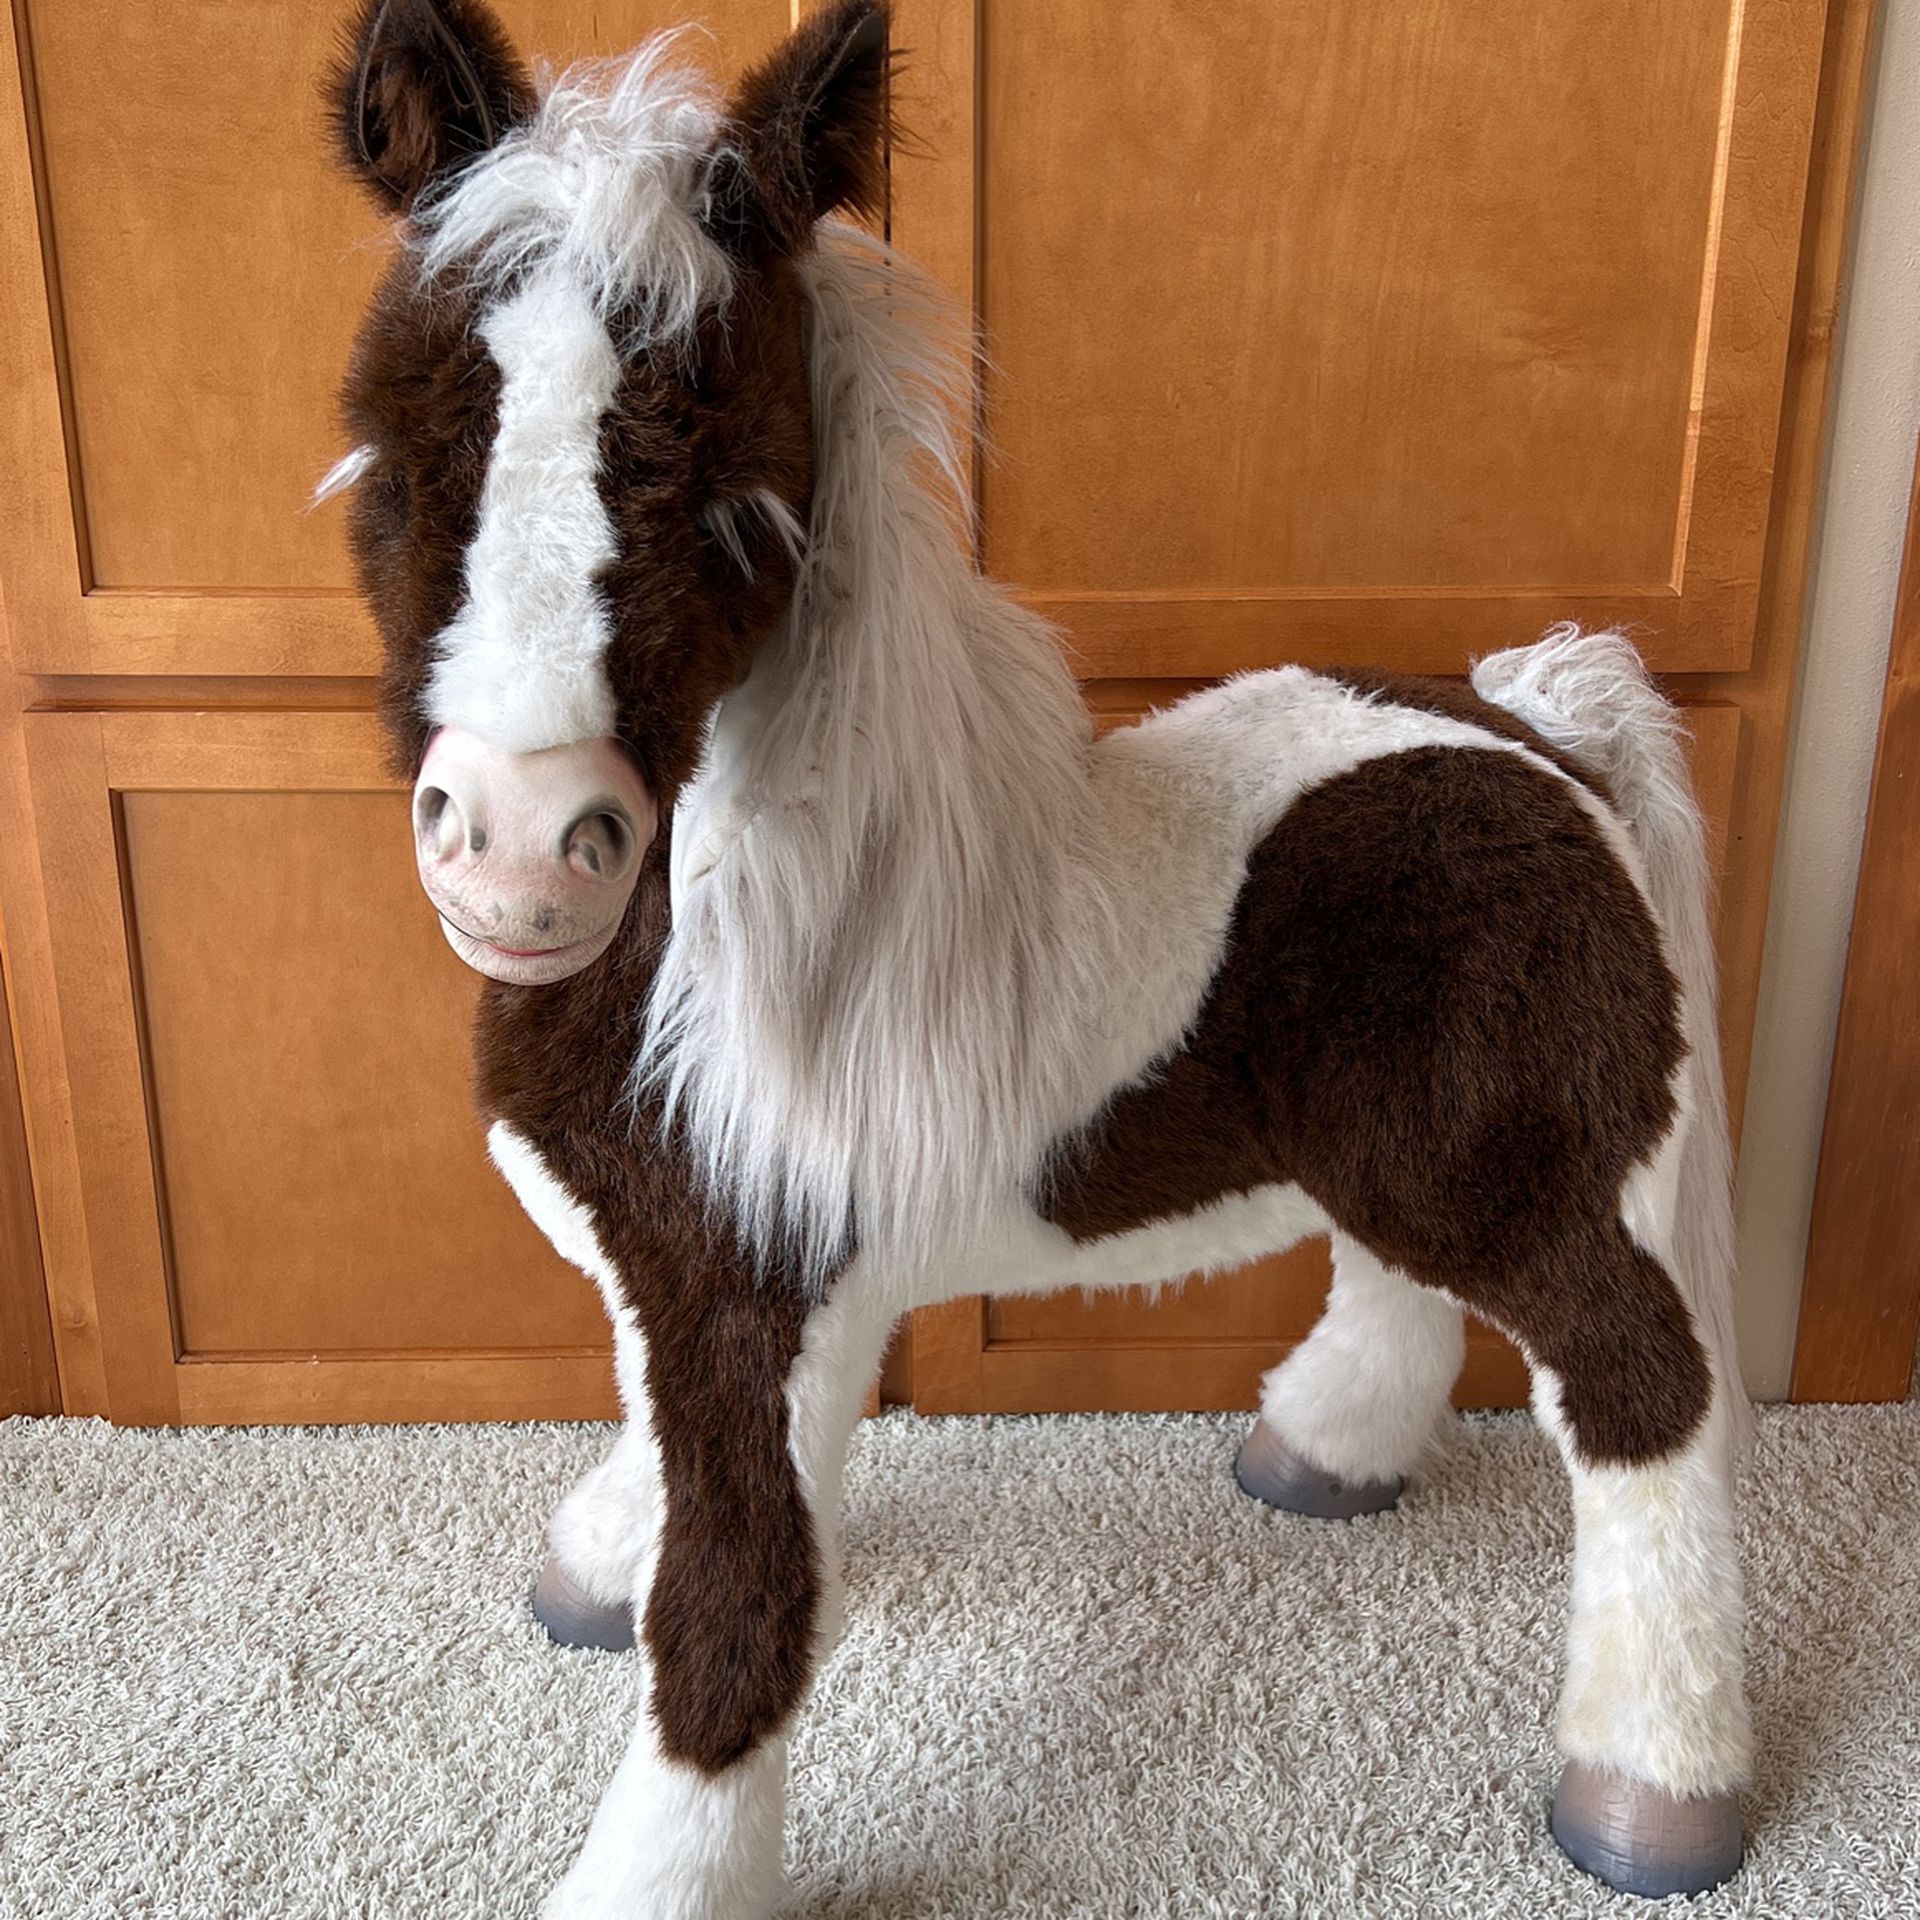 Furreal Friends S’mores Pony - 3’ Tall & Animated